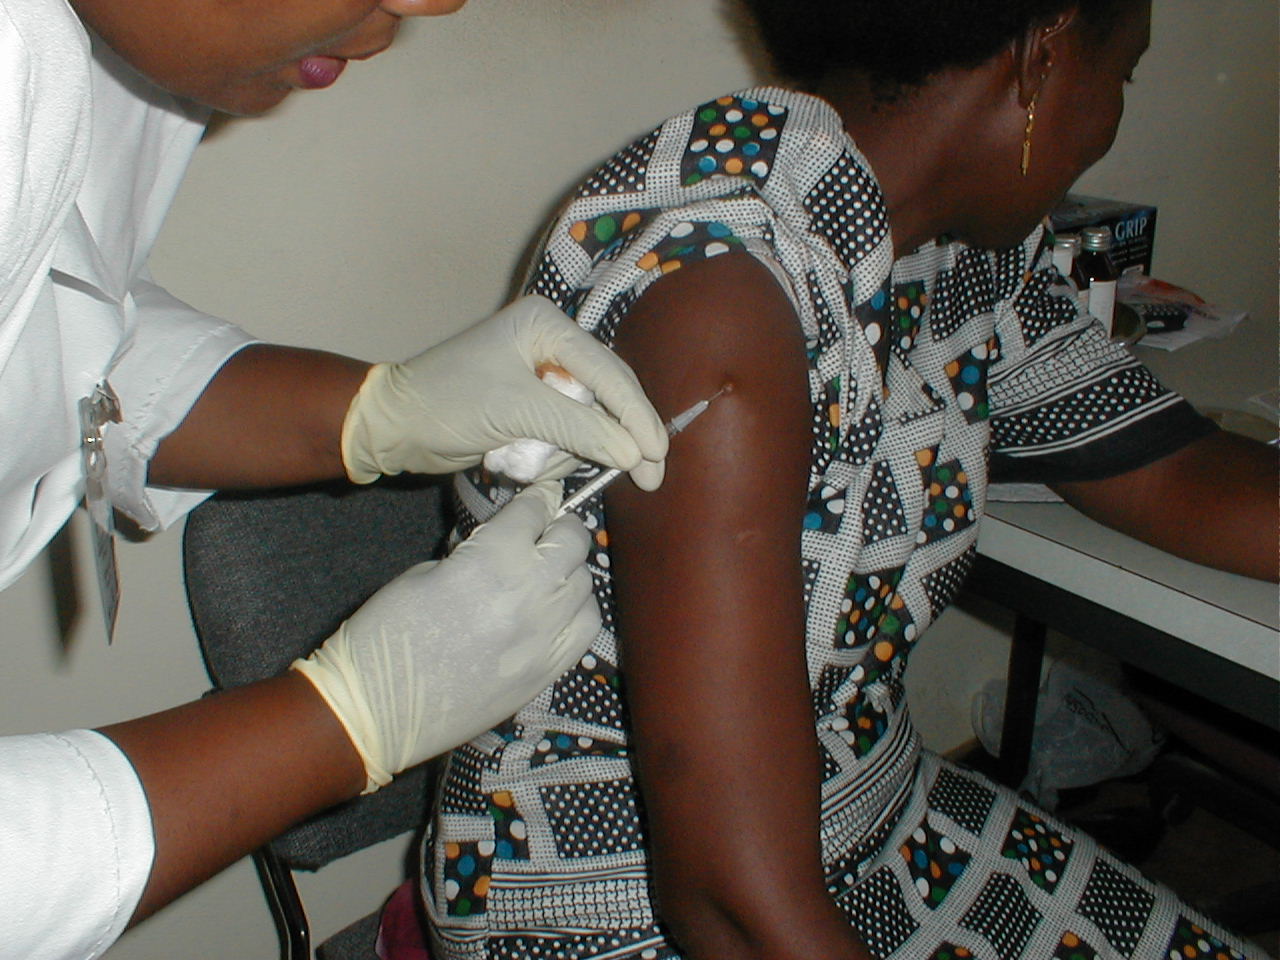 News about the success of a new Ebola vaccine may be too good to be true